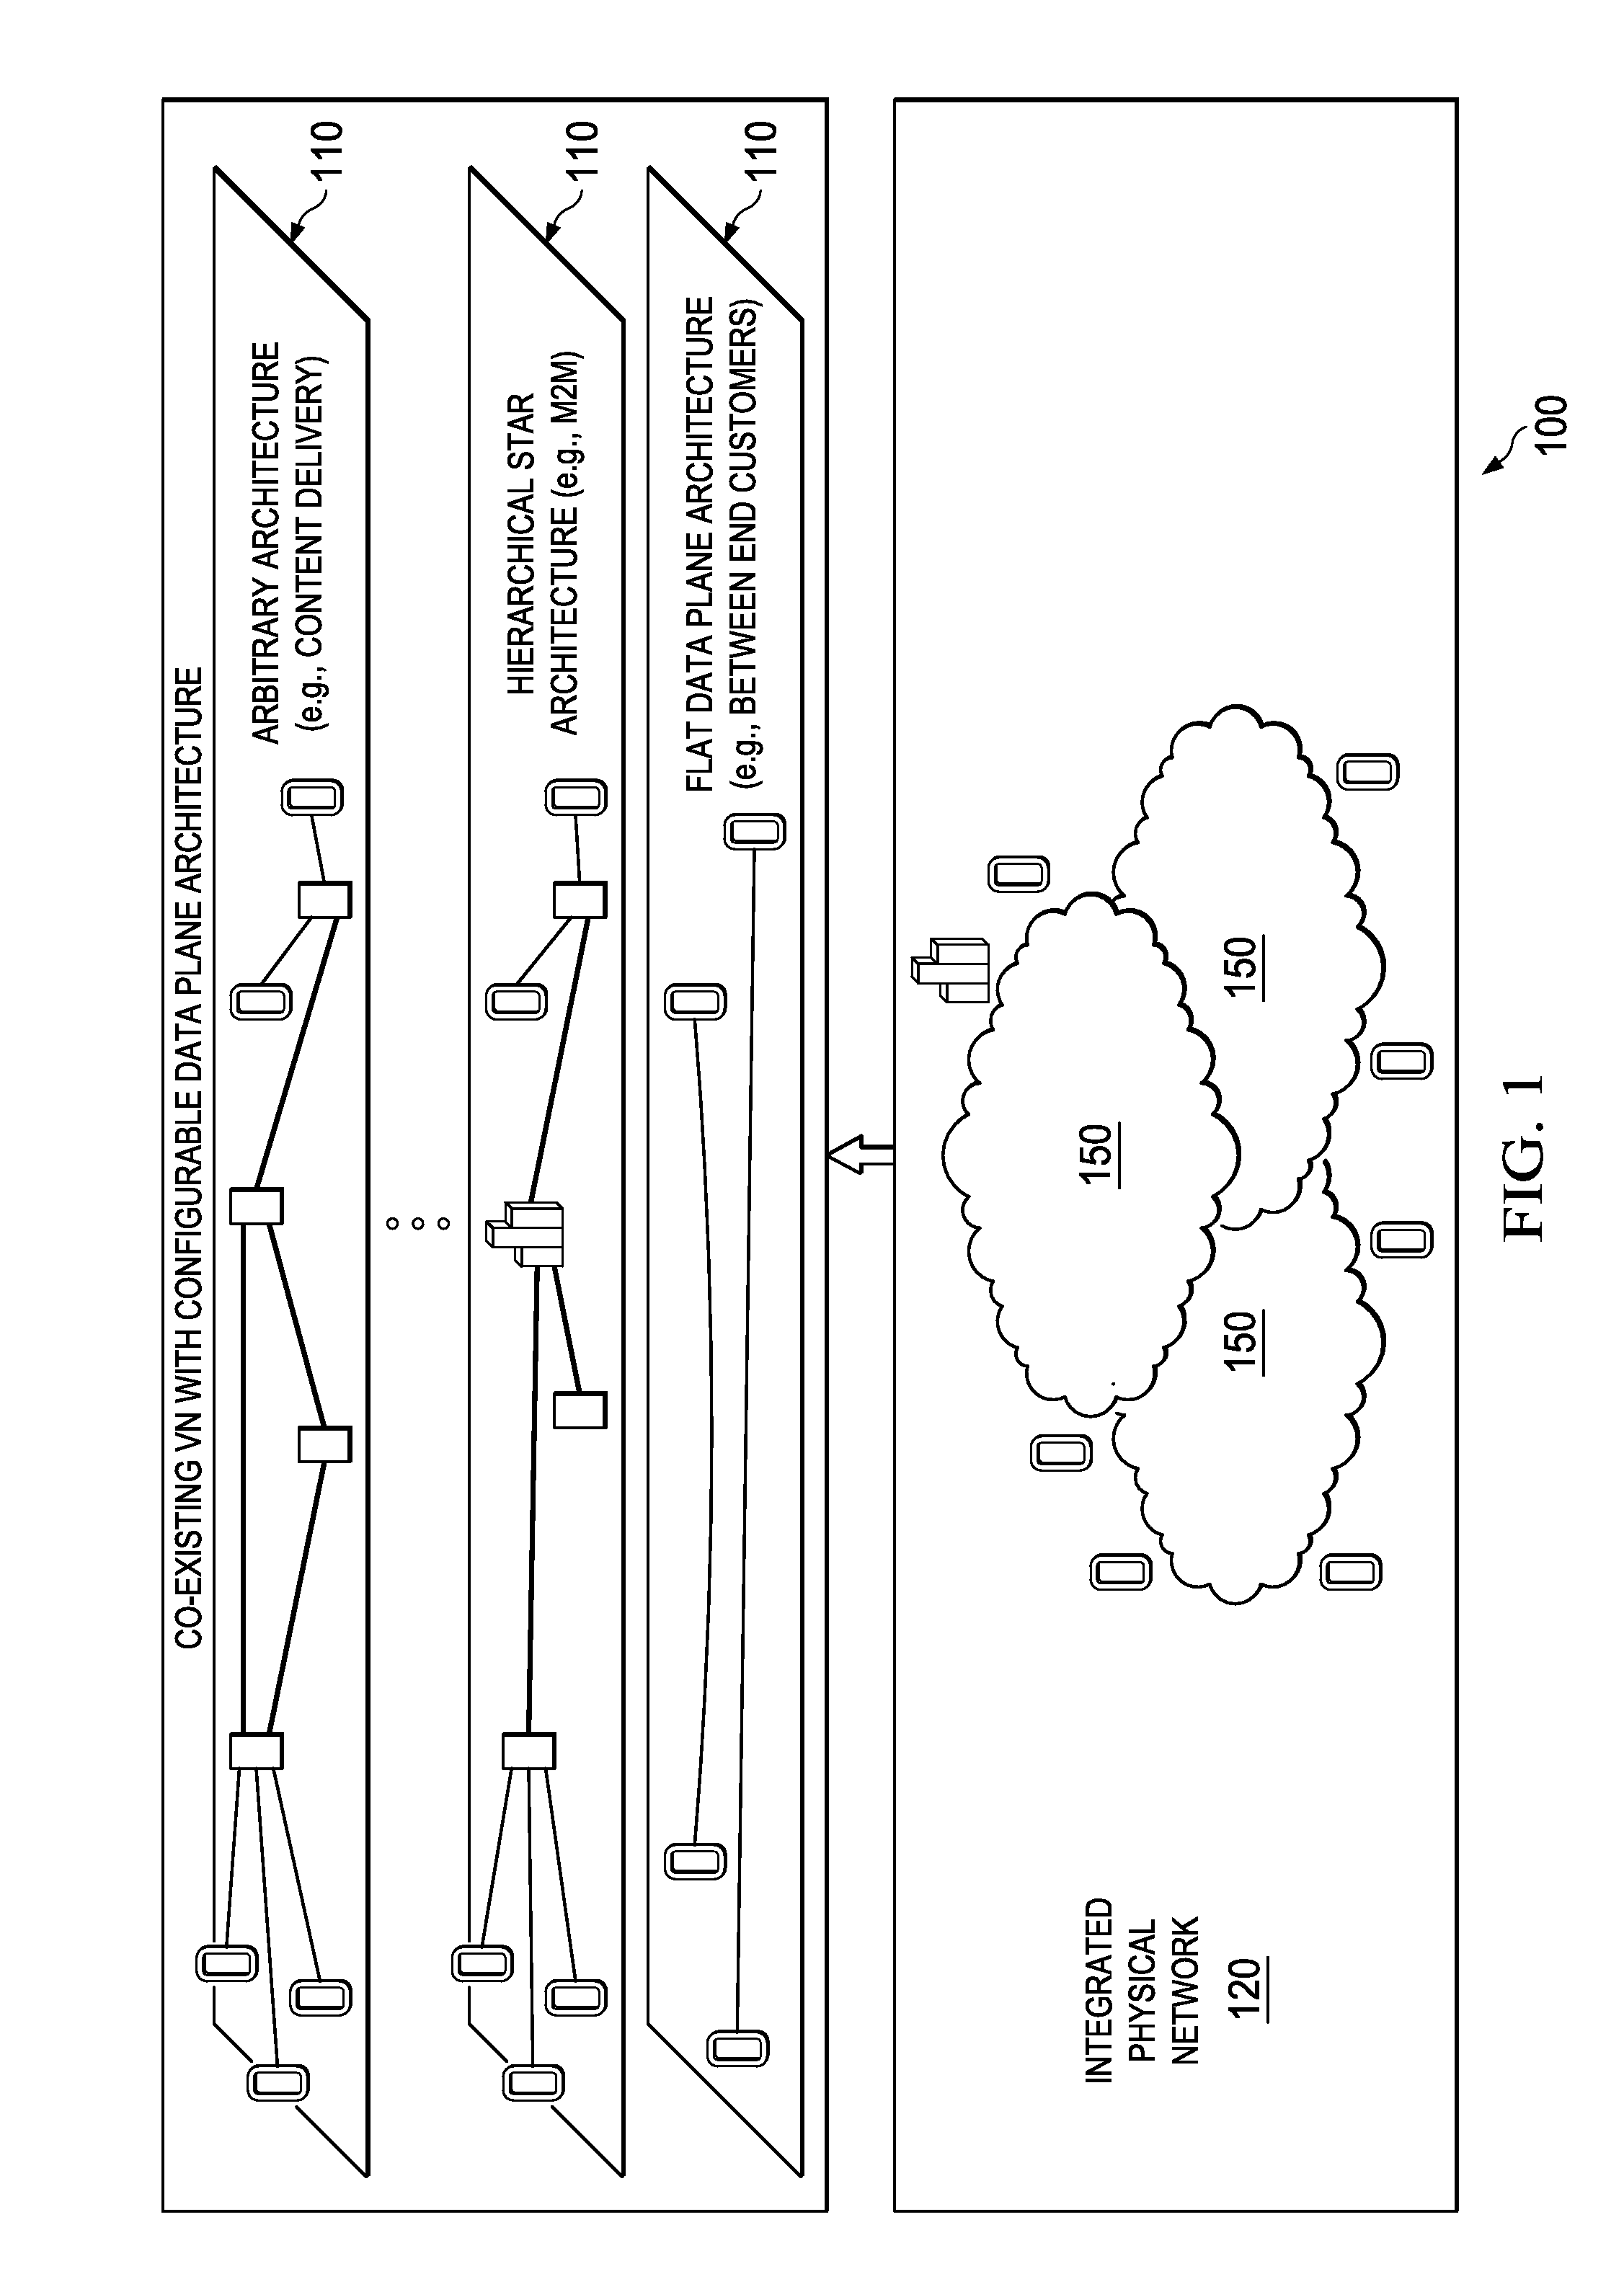 System and Method for a Control Plane Reference Model Framework